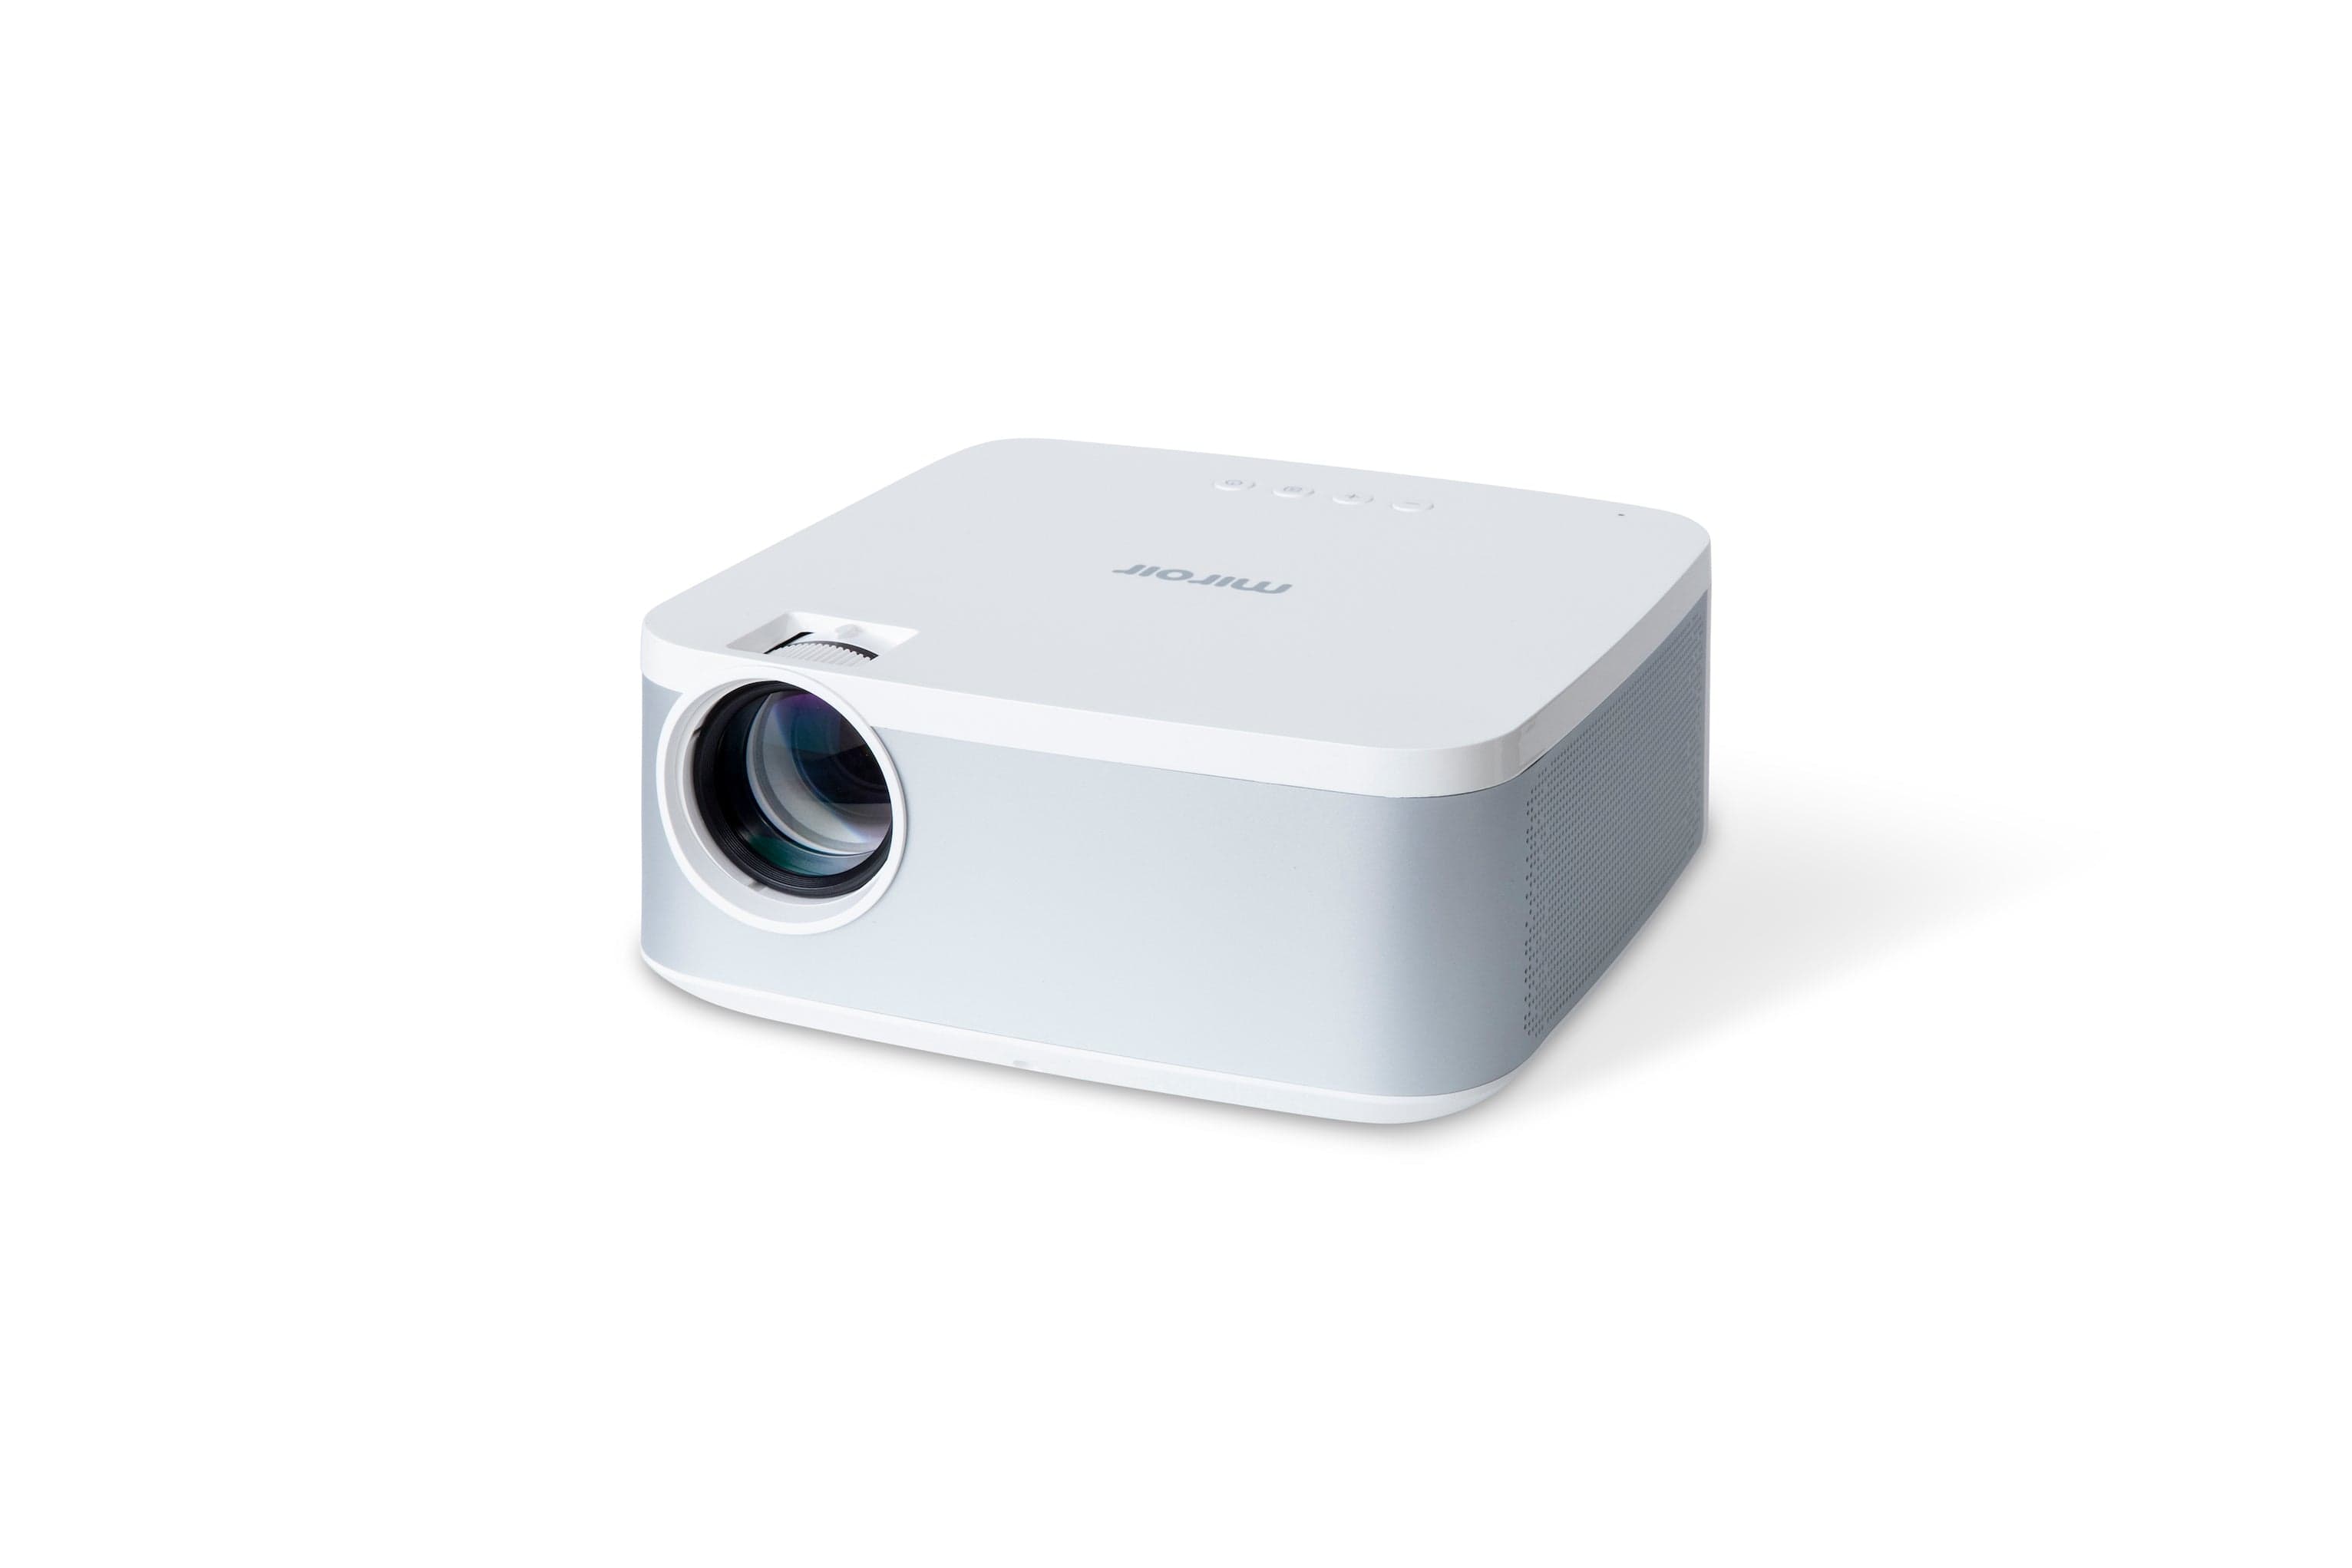 Miroir L500S Smart Wireless 1080p Projector, 5G Wireless & Bluetooth, 90-inch screen, built-in streaming for Netflix, for the ultimate home cinema experience.